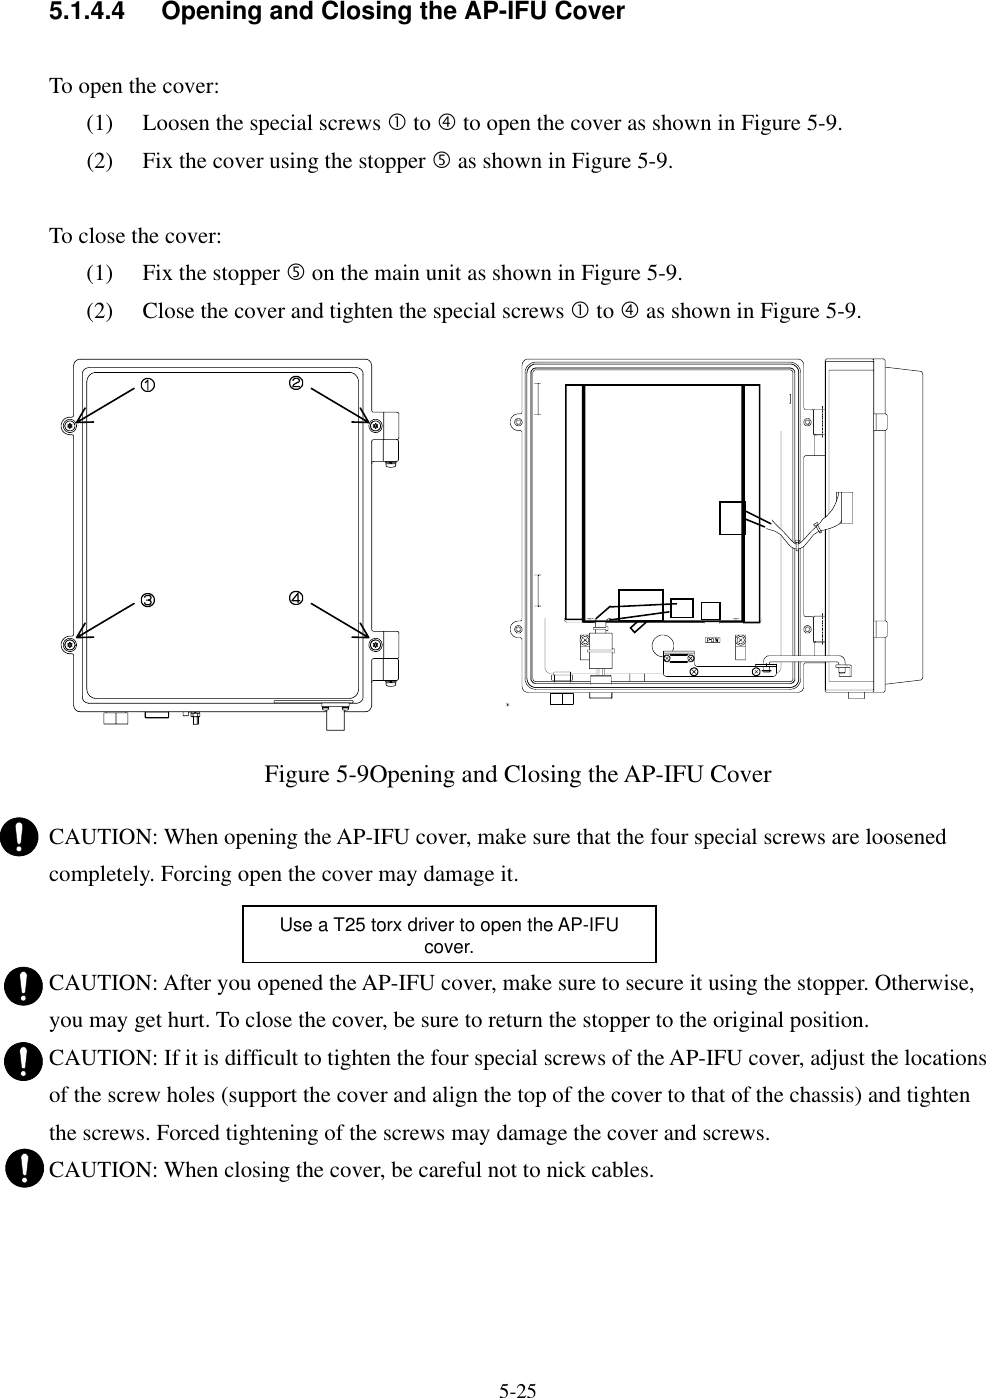   5-25    5.1.4.4  Opening and Closing the AP-IFU Cover  To open the cover: (1)  Loosen the special screws c to f to open the cover as shown in Figure 5-9. (2)  Fix the cover using the stopper g as shown in Figure 5-9.  To close the cover: (1)  Fix the stopper g on the main unit as shown in Figure 5-9. (2)  Close the cover and tighten the special screws c to f as shown in Figure 5-9.                Figure 5-9Opening and Closing the AP-IFU Cover  CAUTION: When opening the AP-IFU cover, make sure that the four special screws are loosened completely. Forcing open the cover may damage it.   CAUTION: After you opened the AP-IFU cover, make sure to secure it using the stopper. Otherwise, you may get hurt. To close the cover, be sure to return the stopper to the original position. CAUTION: If it is difficult to tighten the four special screws of the AP-IFU cover, adjust the locations of the screw holes (support the cover and align the top of the cover to that of the chassis) and tighten the screws. Forced tightening of the screws may damage the cover and screws. CAUTION: When closing the cover, be careful not to nick cables.Use a T25 torx driver to open the AP-IFU cover.